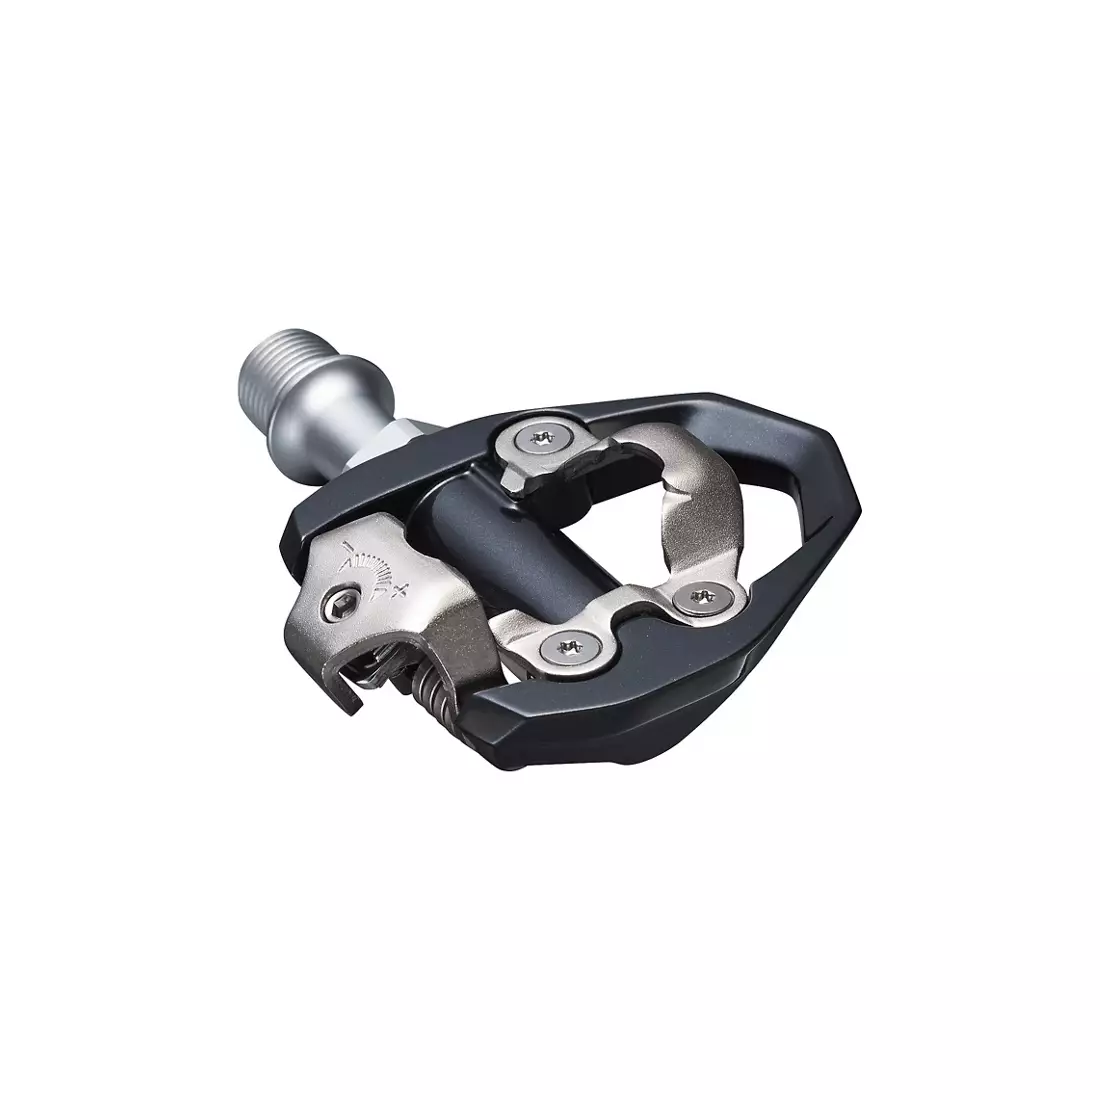 SHIMANO SPD PD-ES600 Road bicycle pedals with cleats